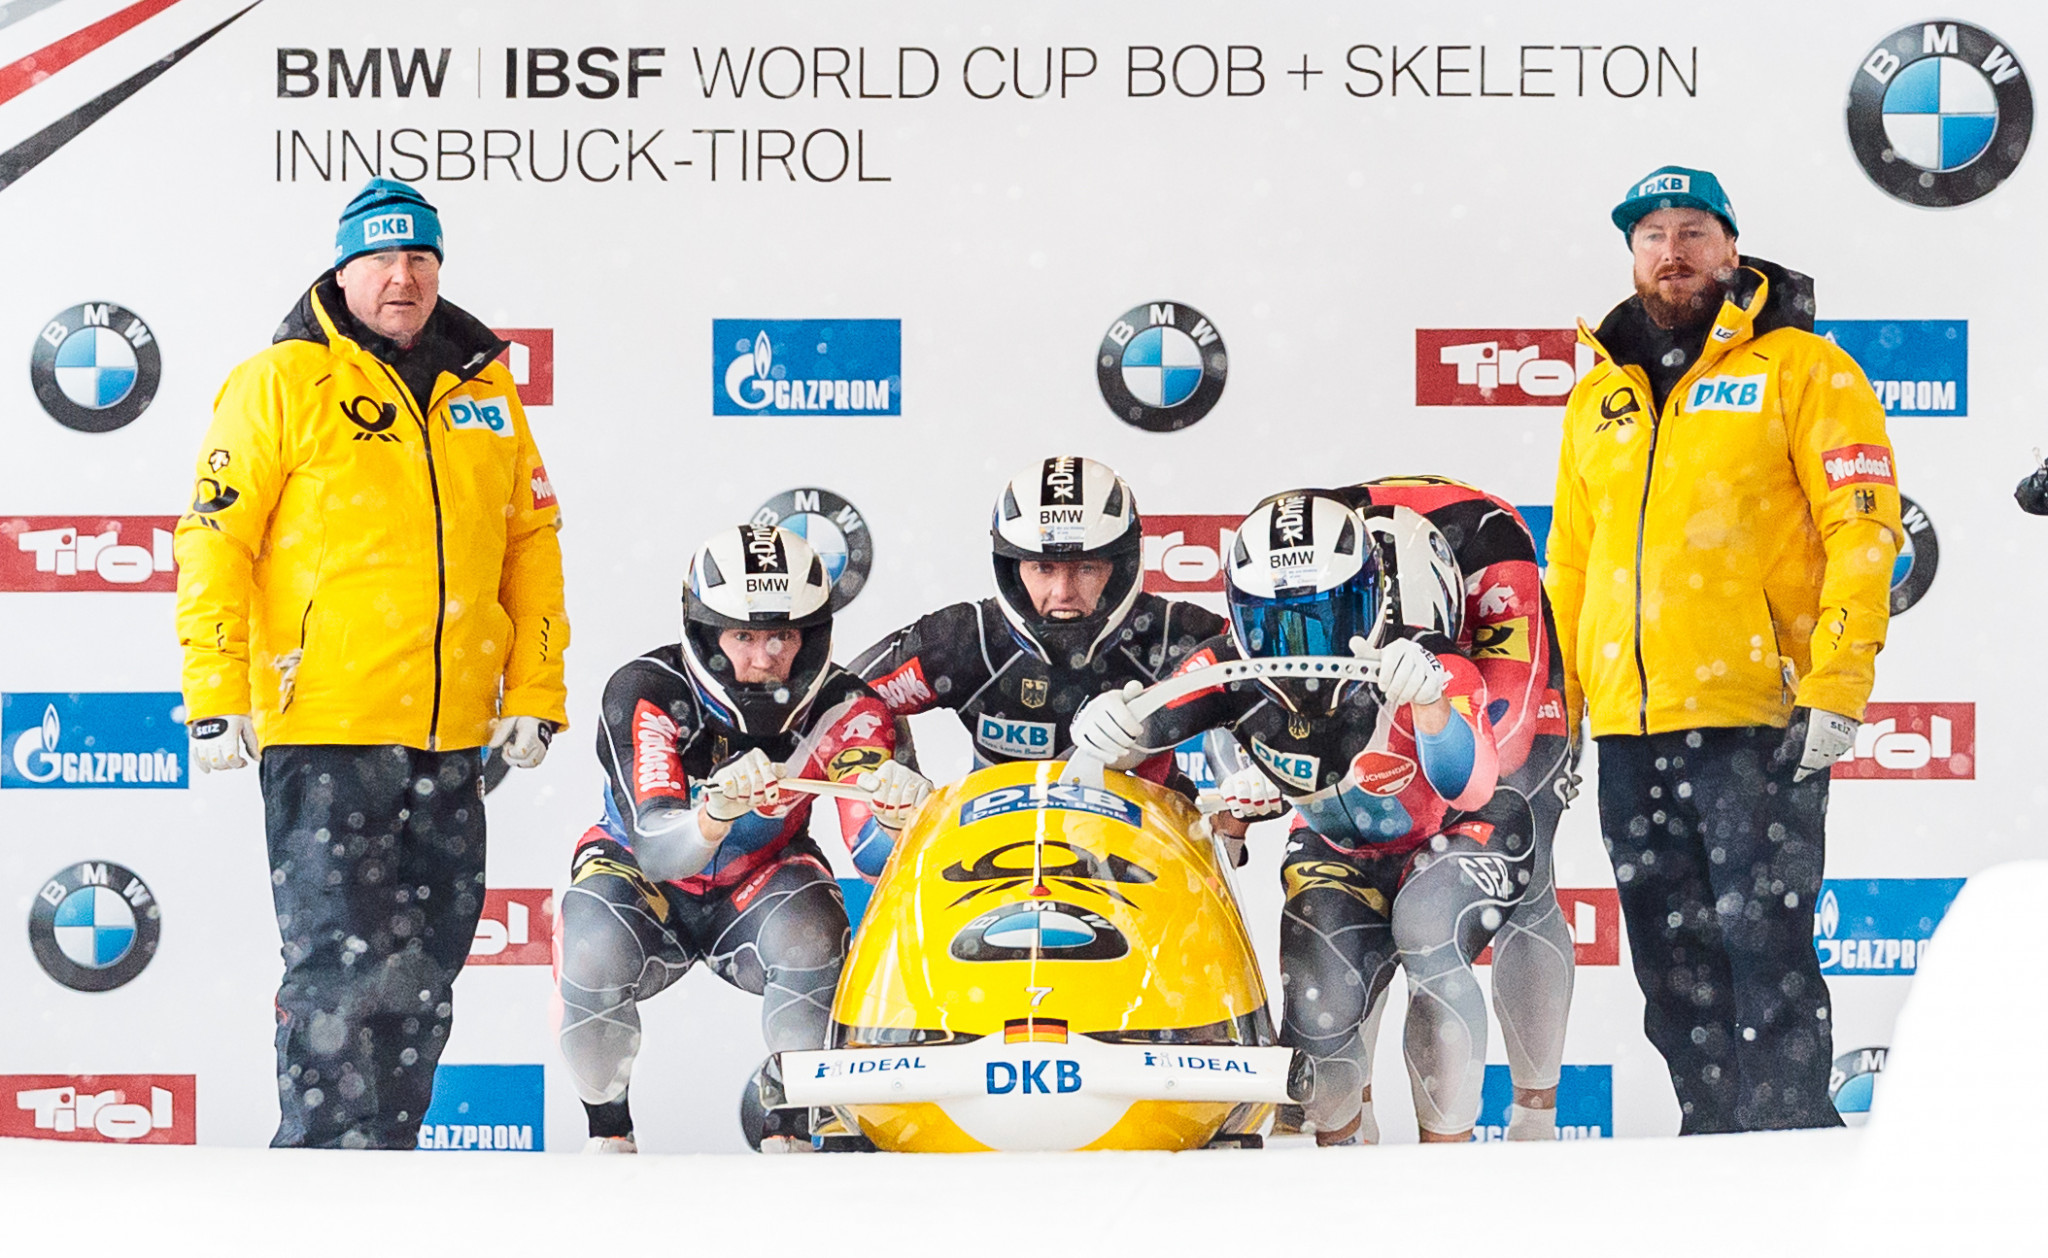 Innsbruck will now stage three IBSF World Cup legs this season ©Getty Images